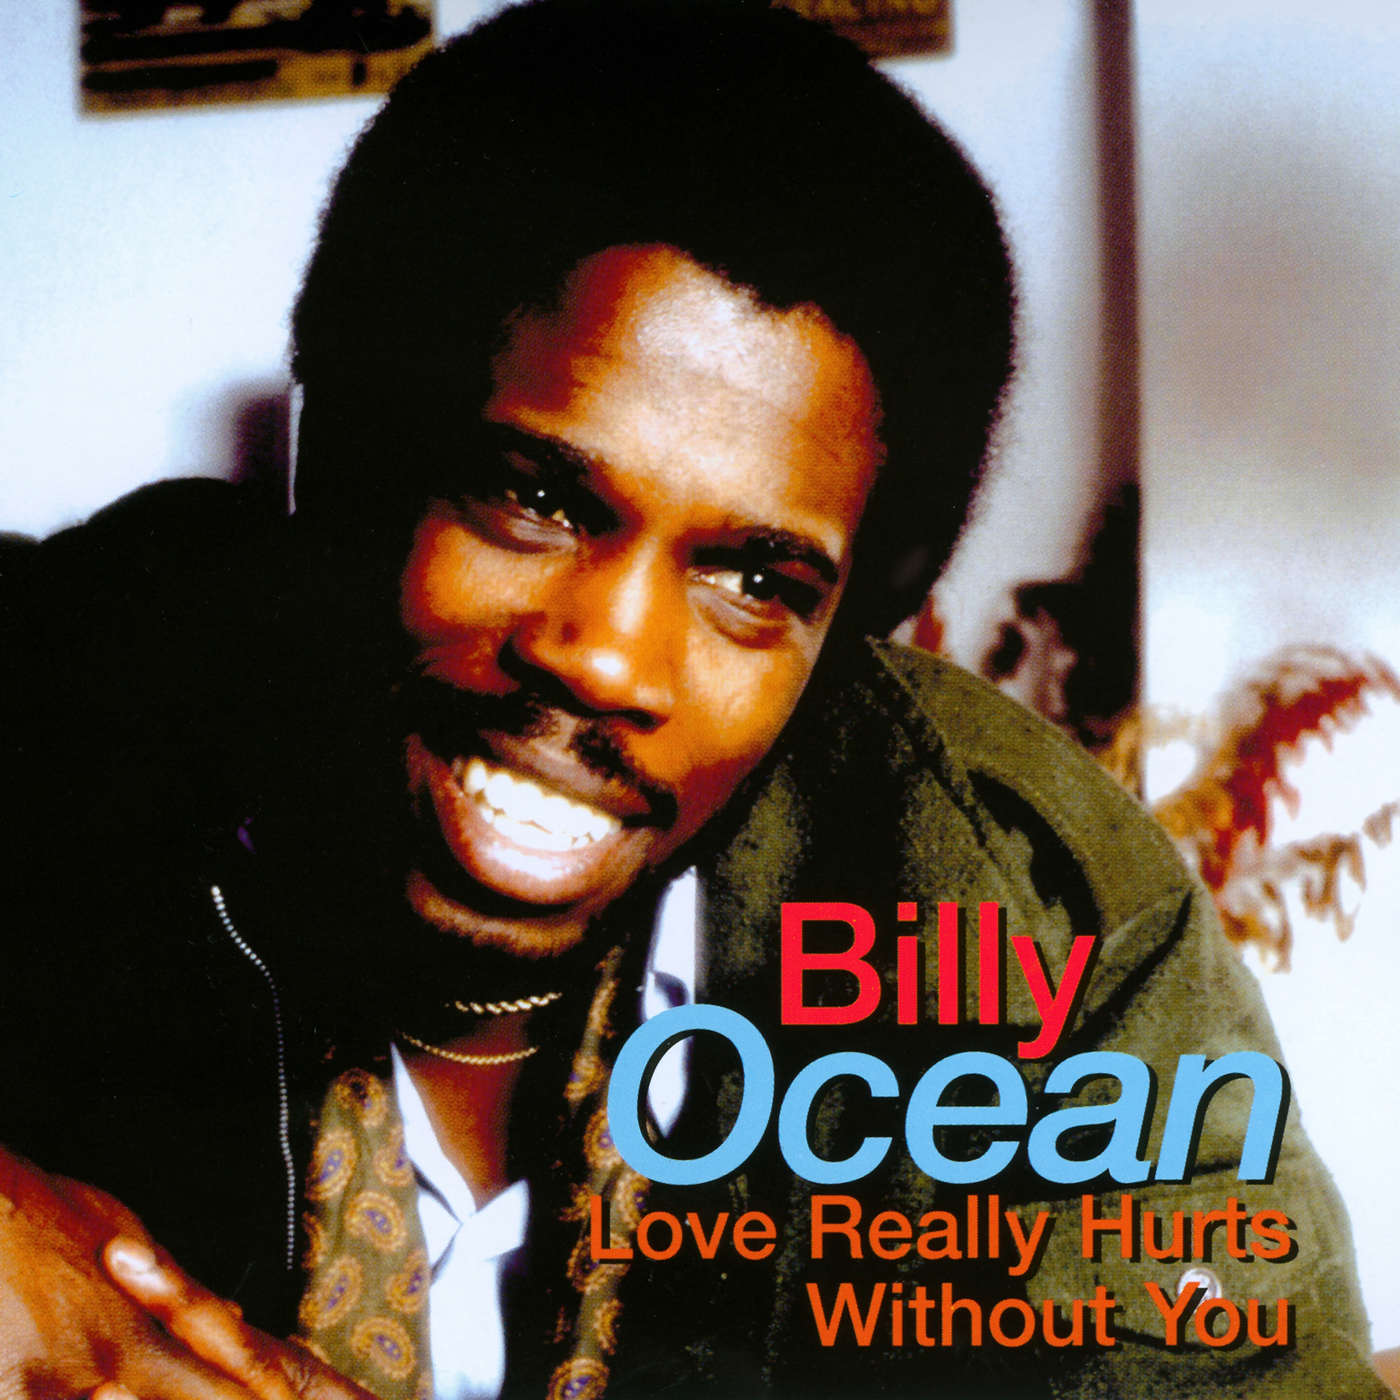 Love Really Hurts Without You by Billy Ocean on Sunshine Soul